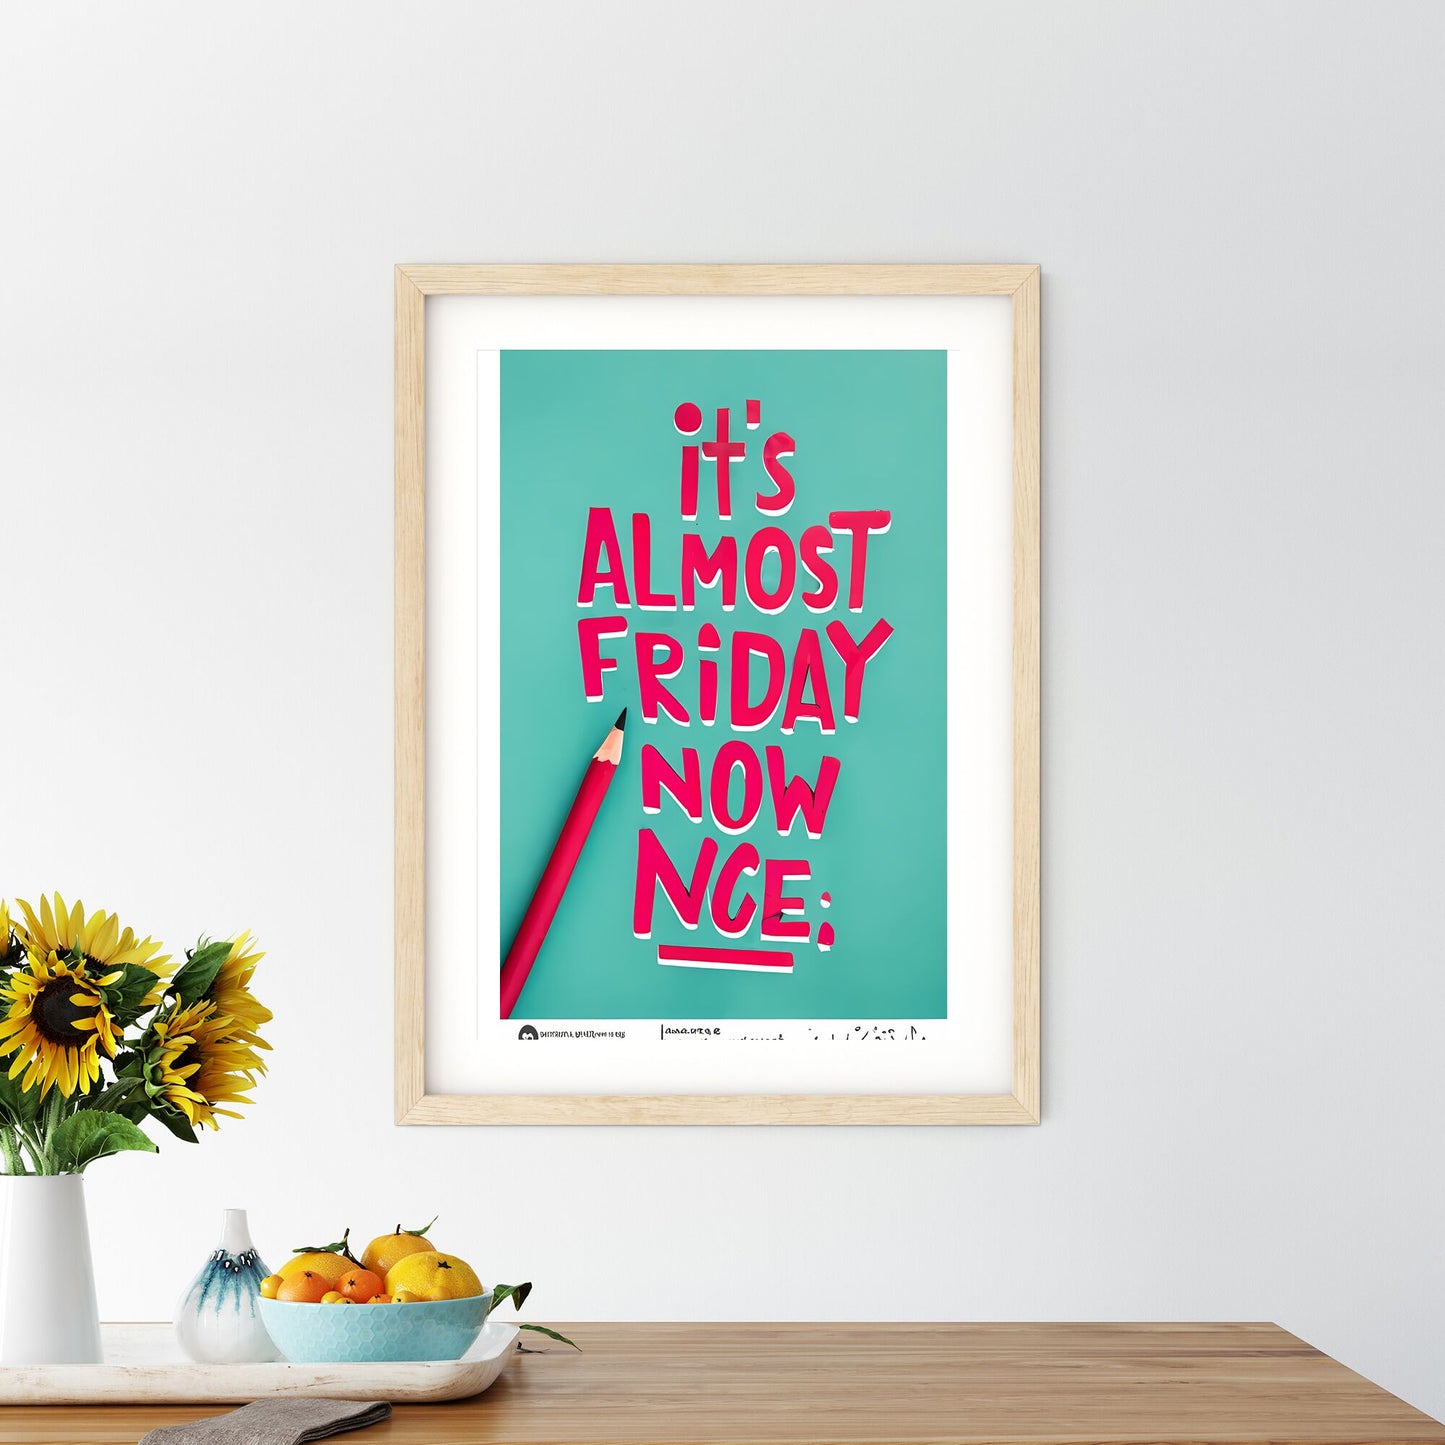 Its Almost Friday Now - A Pencil On A Blue Surface Art Print Default Title